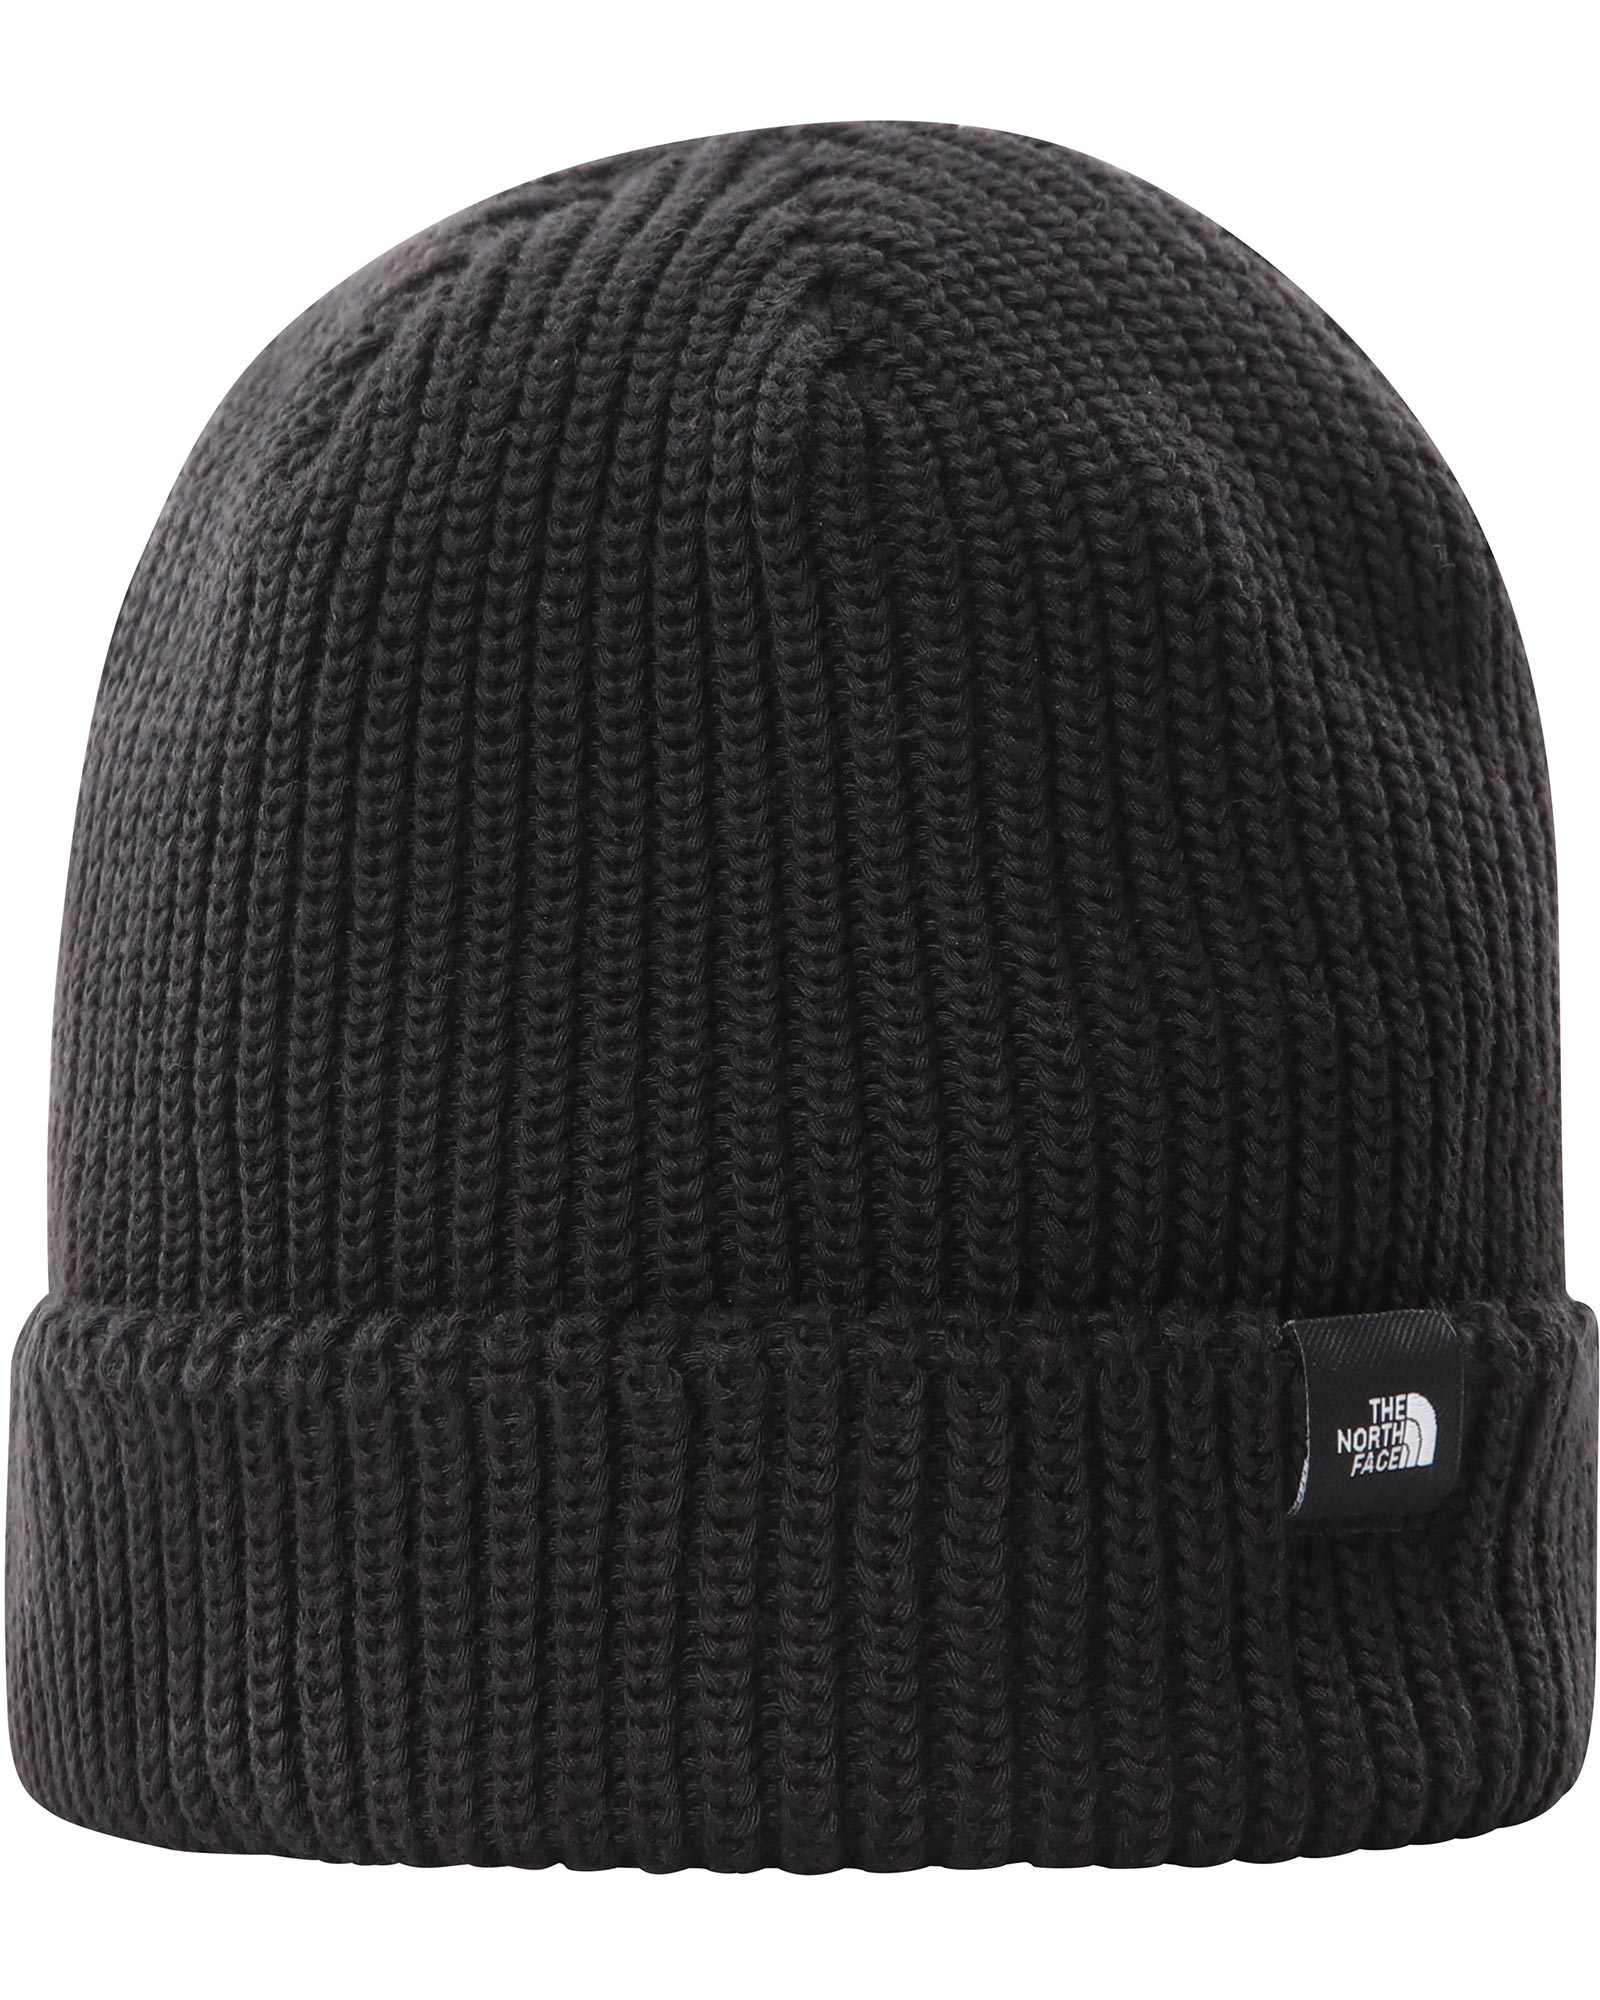 The North Face Tnf Fishermans Beanie